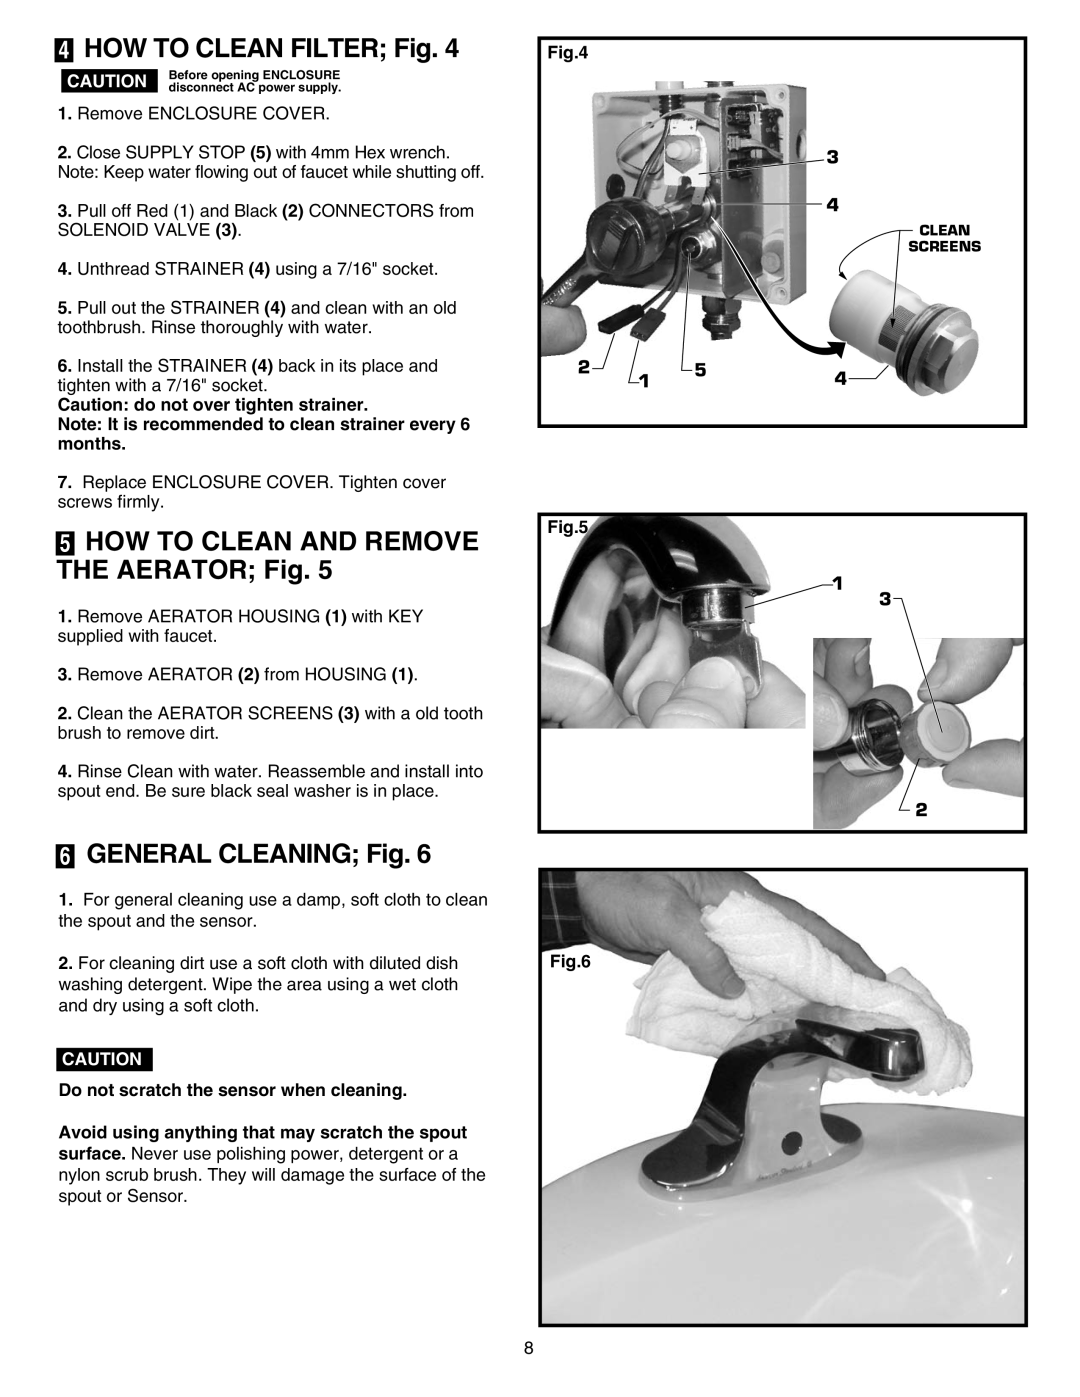 American Standard M968498 warranty HOW TO CLEAN FILTER Fig, 5HOW TO CLEAN AND REMOVE THE AERATOR Fig, GENERAL CLEANING Fig 